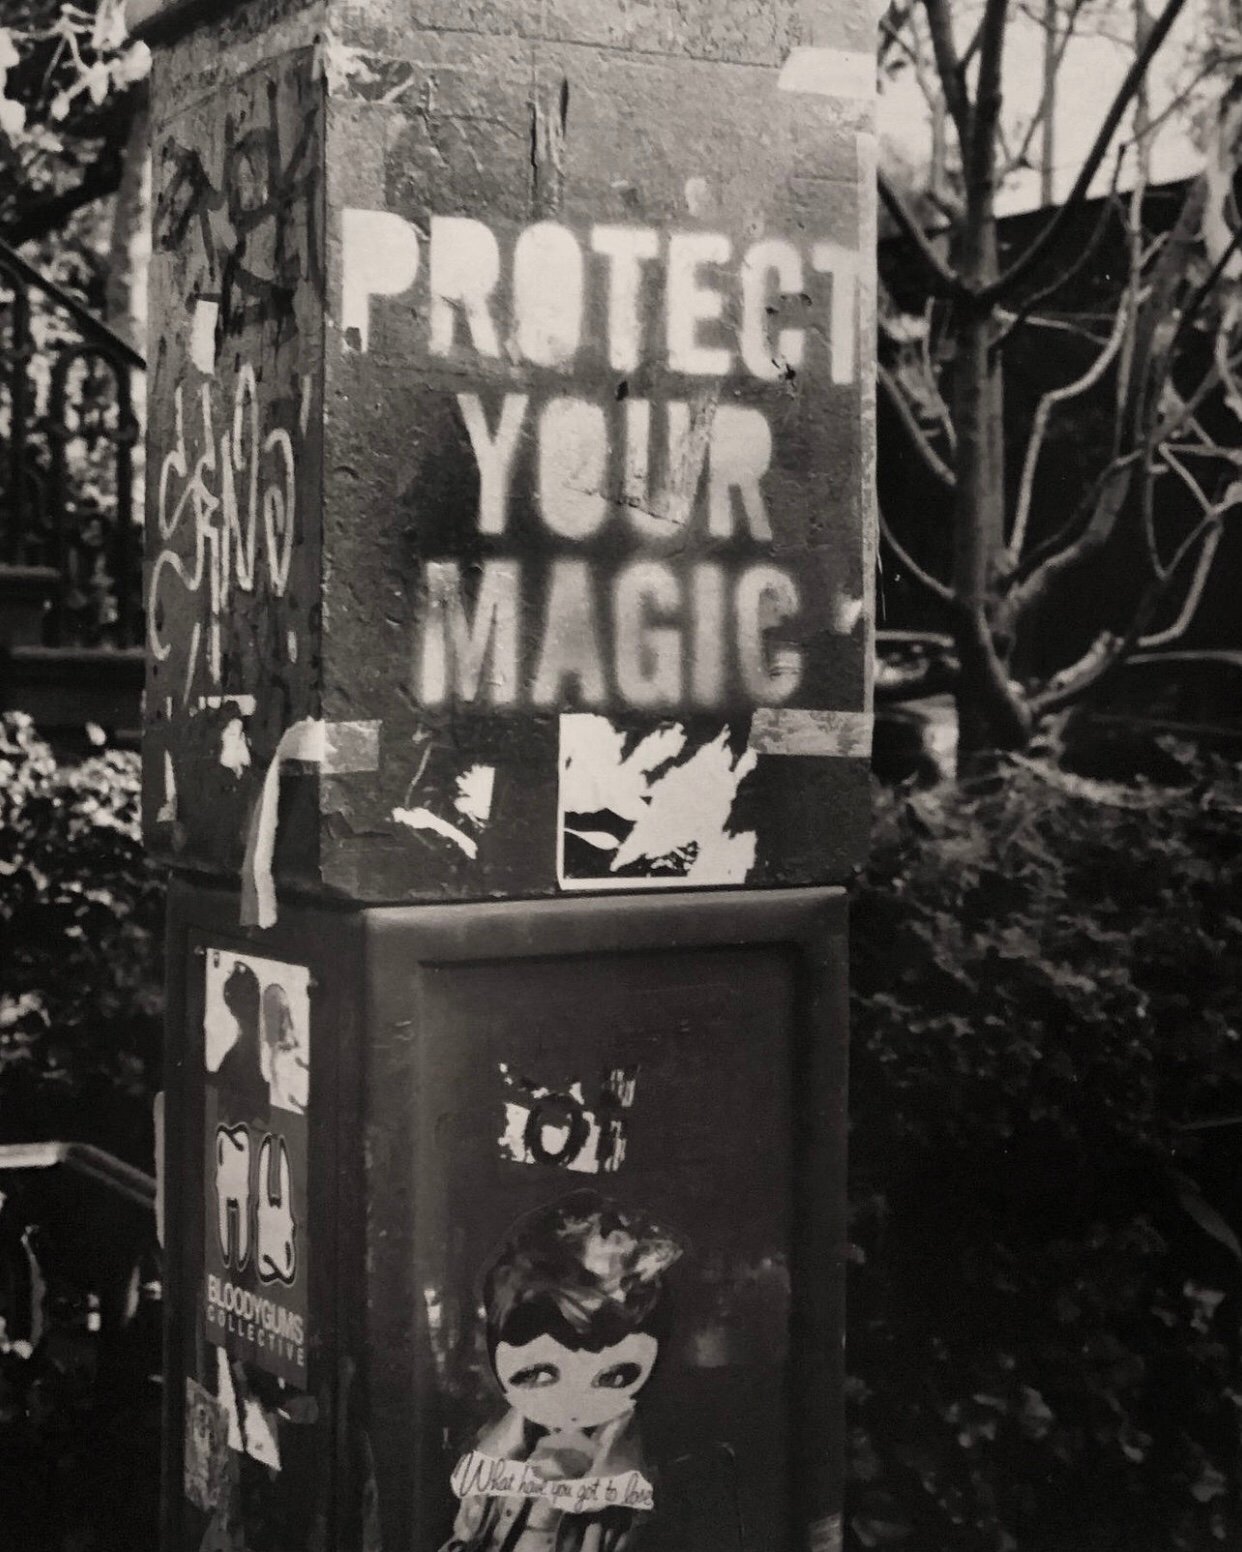 Image of Protect Your Magic